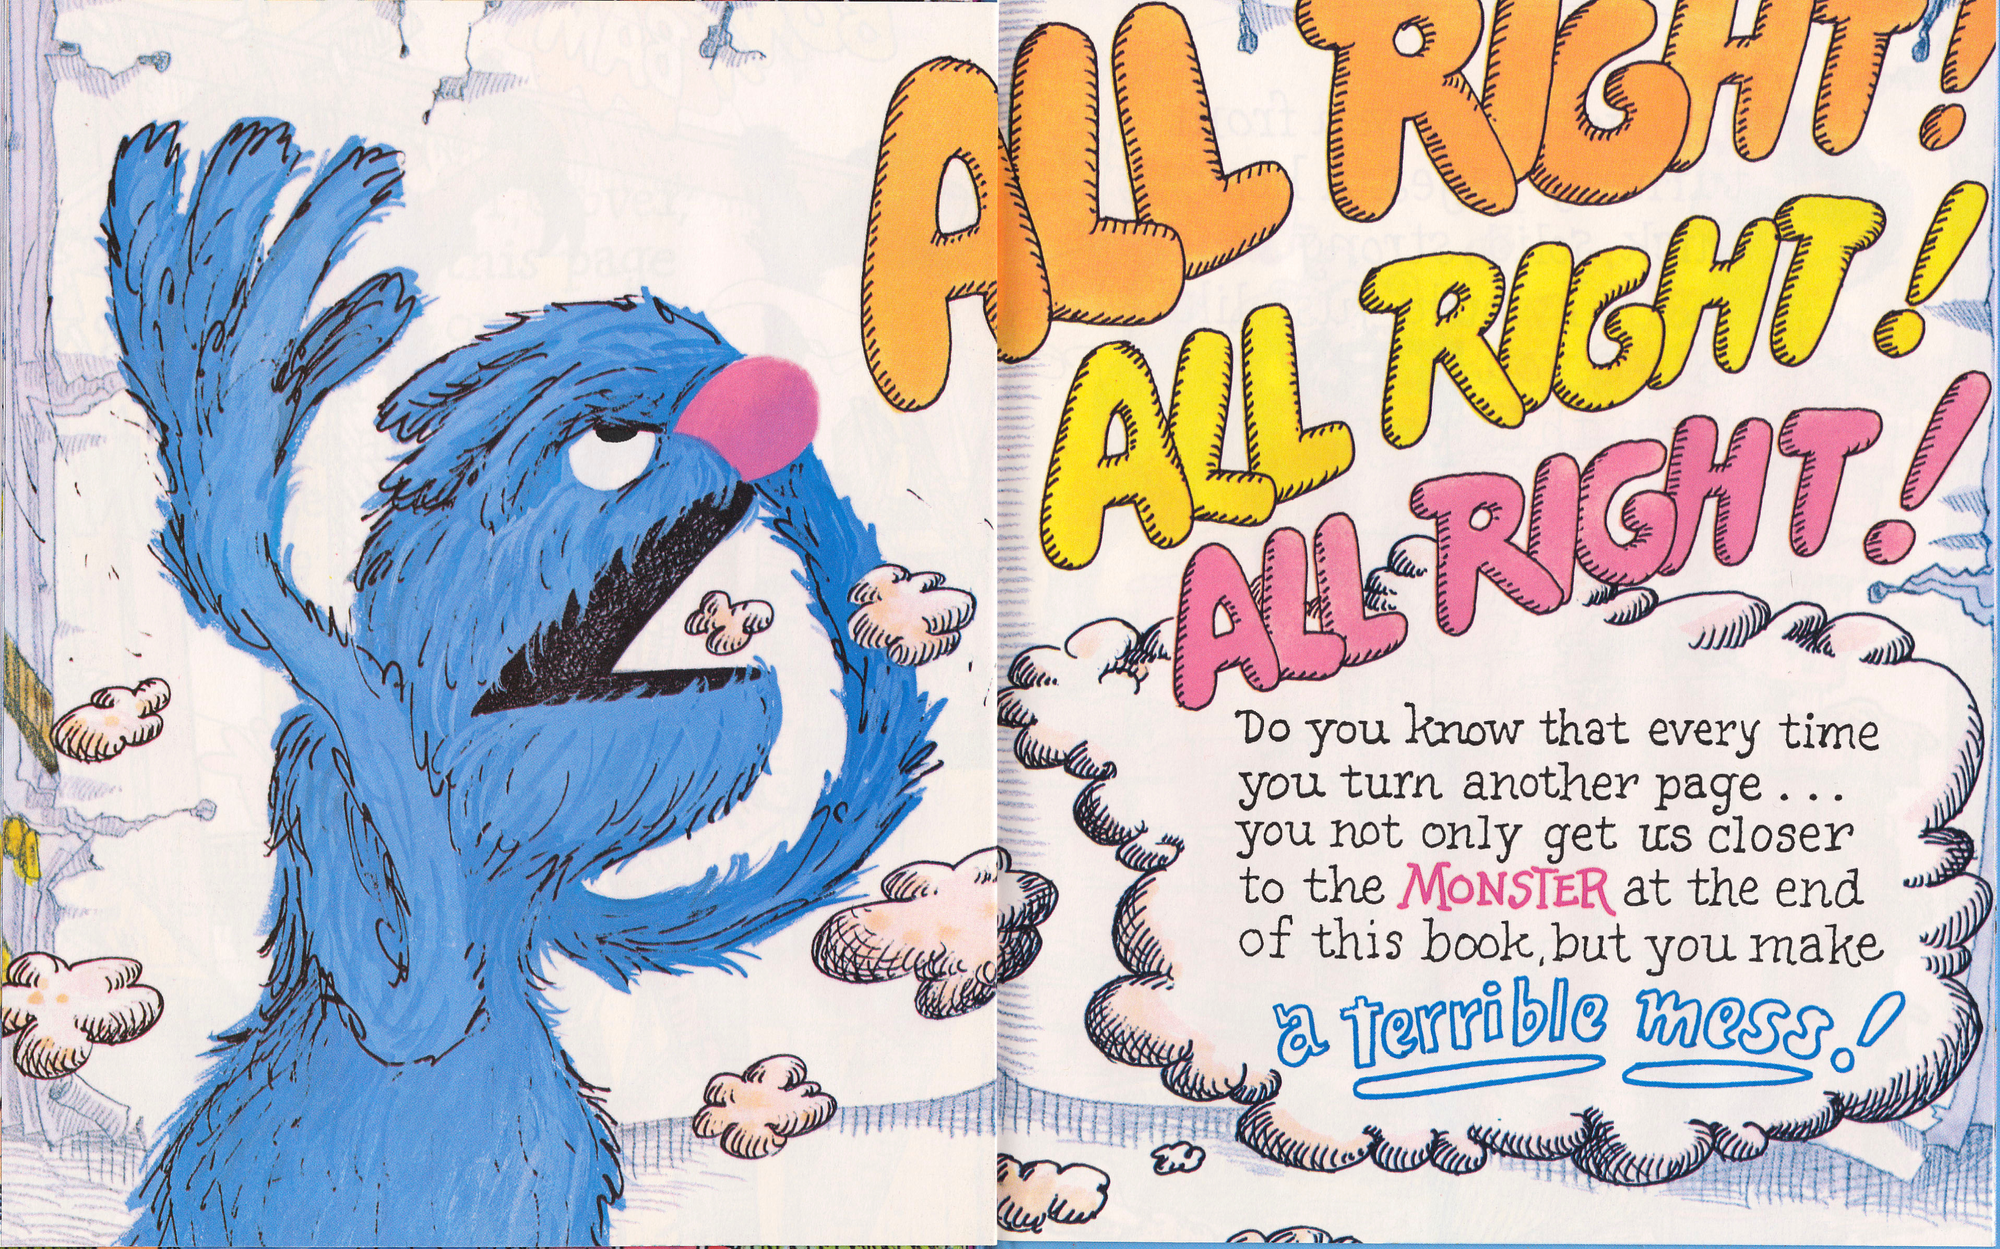 After the reader destroys one of his obstacles, Grover complains that they are both moving closer to the monster and that the reader is making a terrible mess.